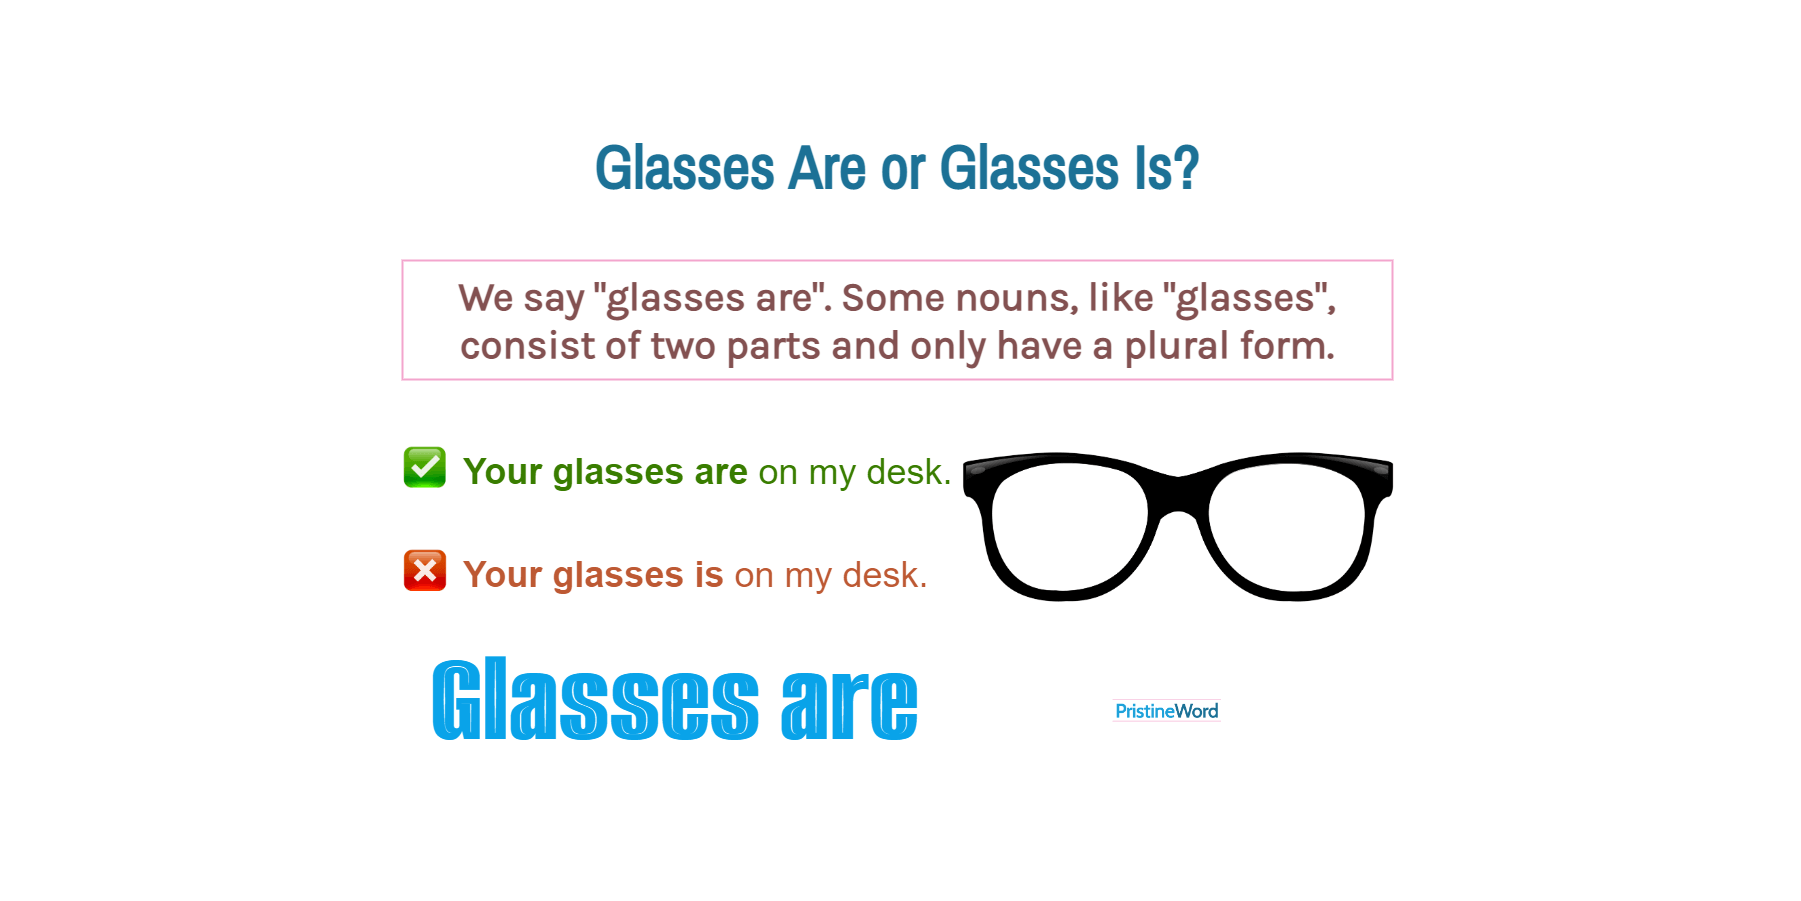 Glasses Are Or Glasses Is. Which Is Correct?